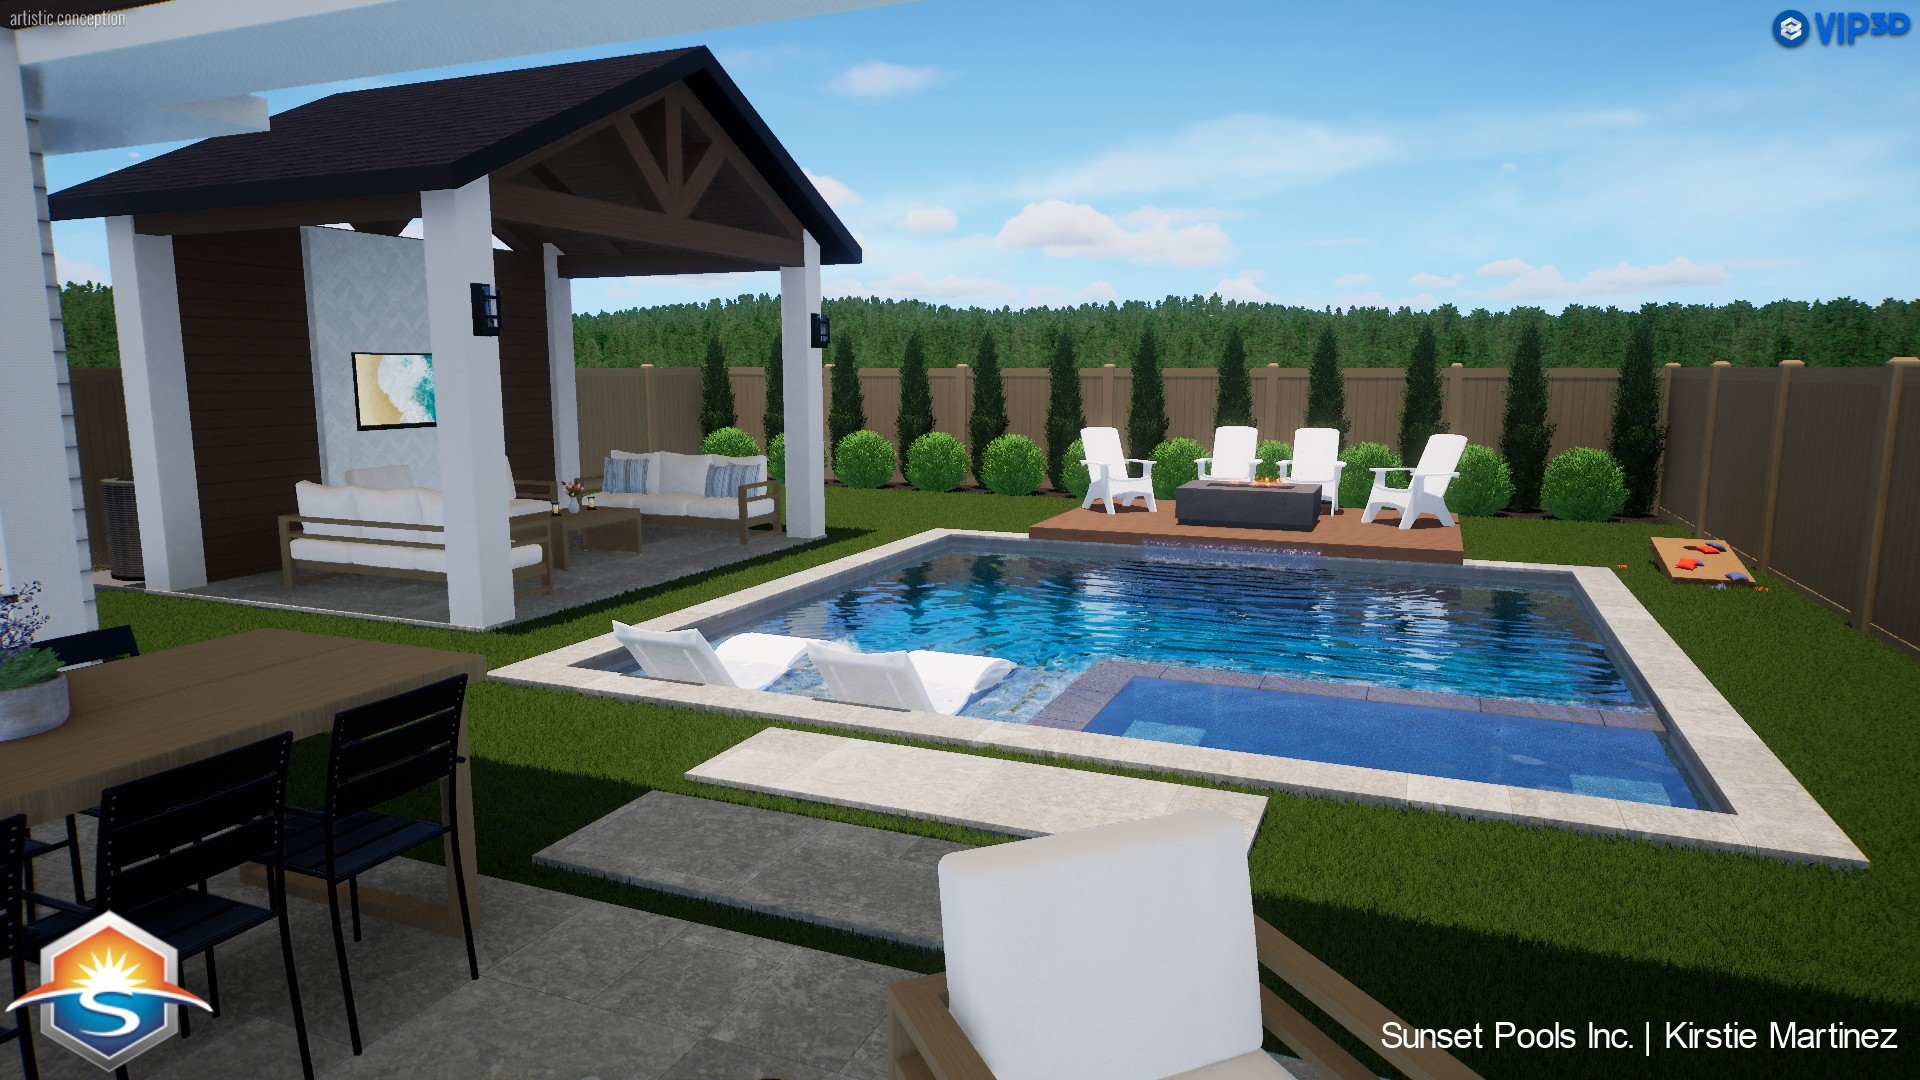 Virtual rendering of pool from perspective of house looking out.